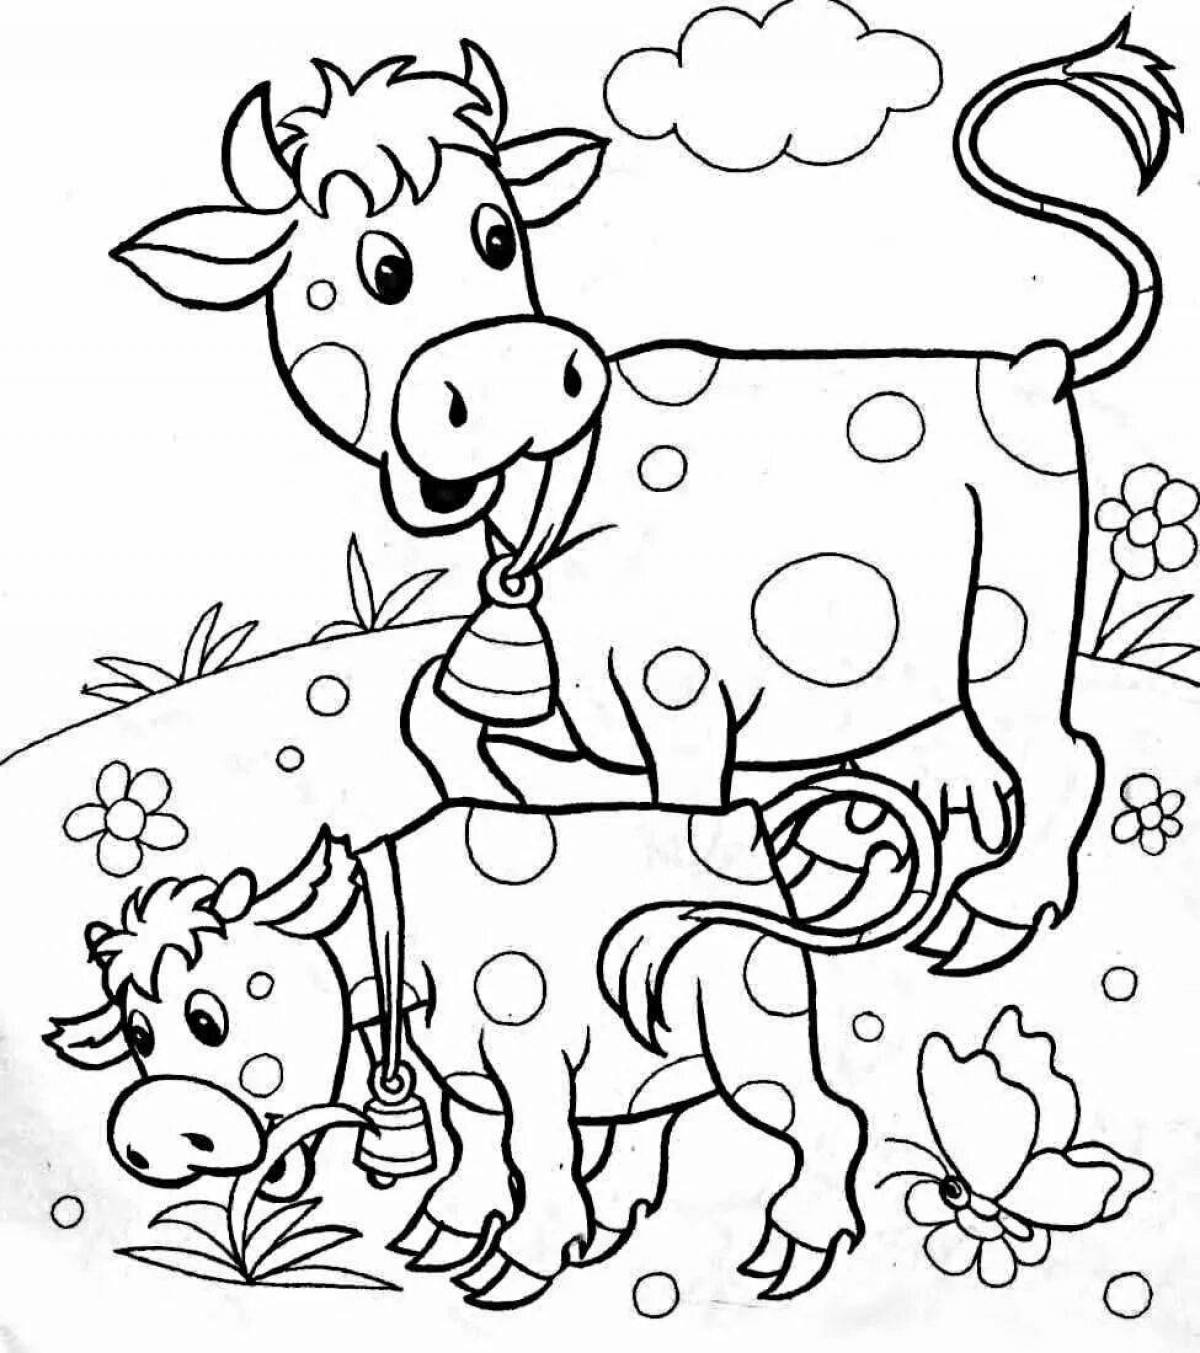 Adorable pet coloring pages for 5-7 year olds